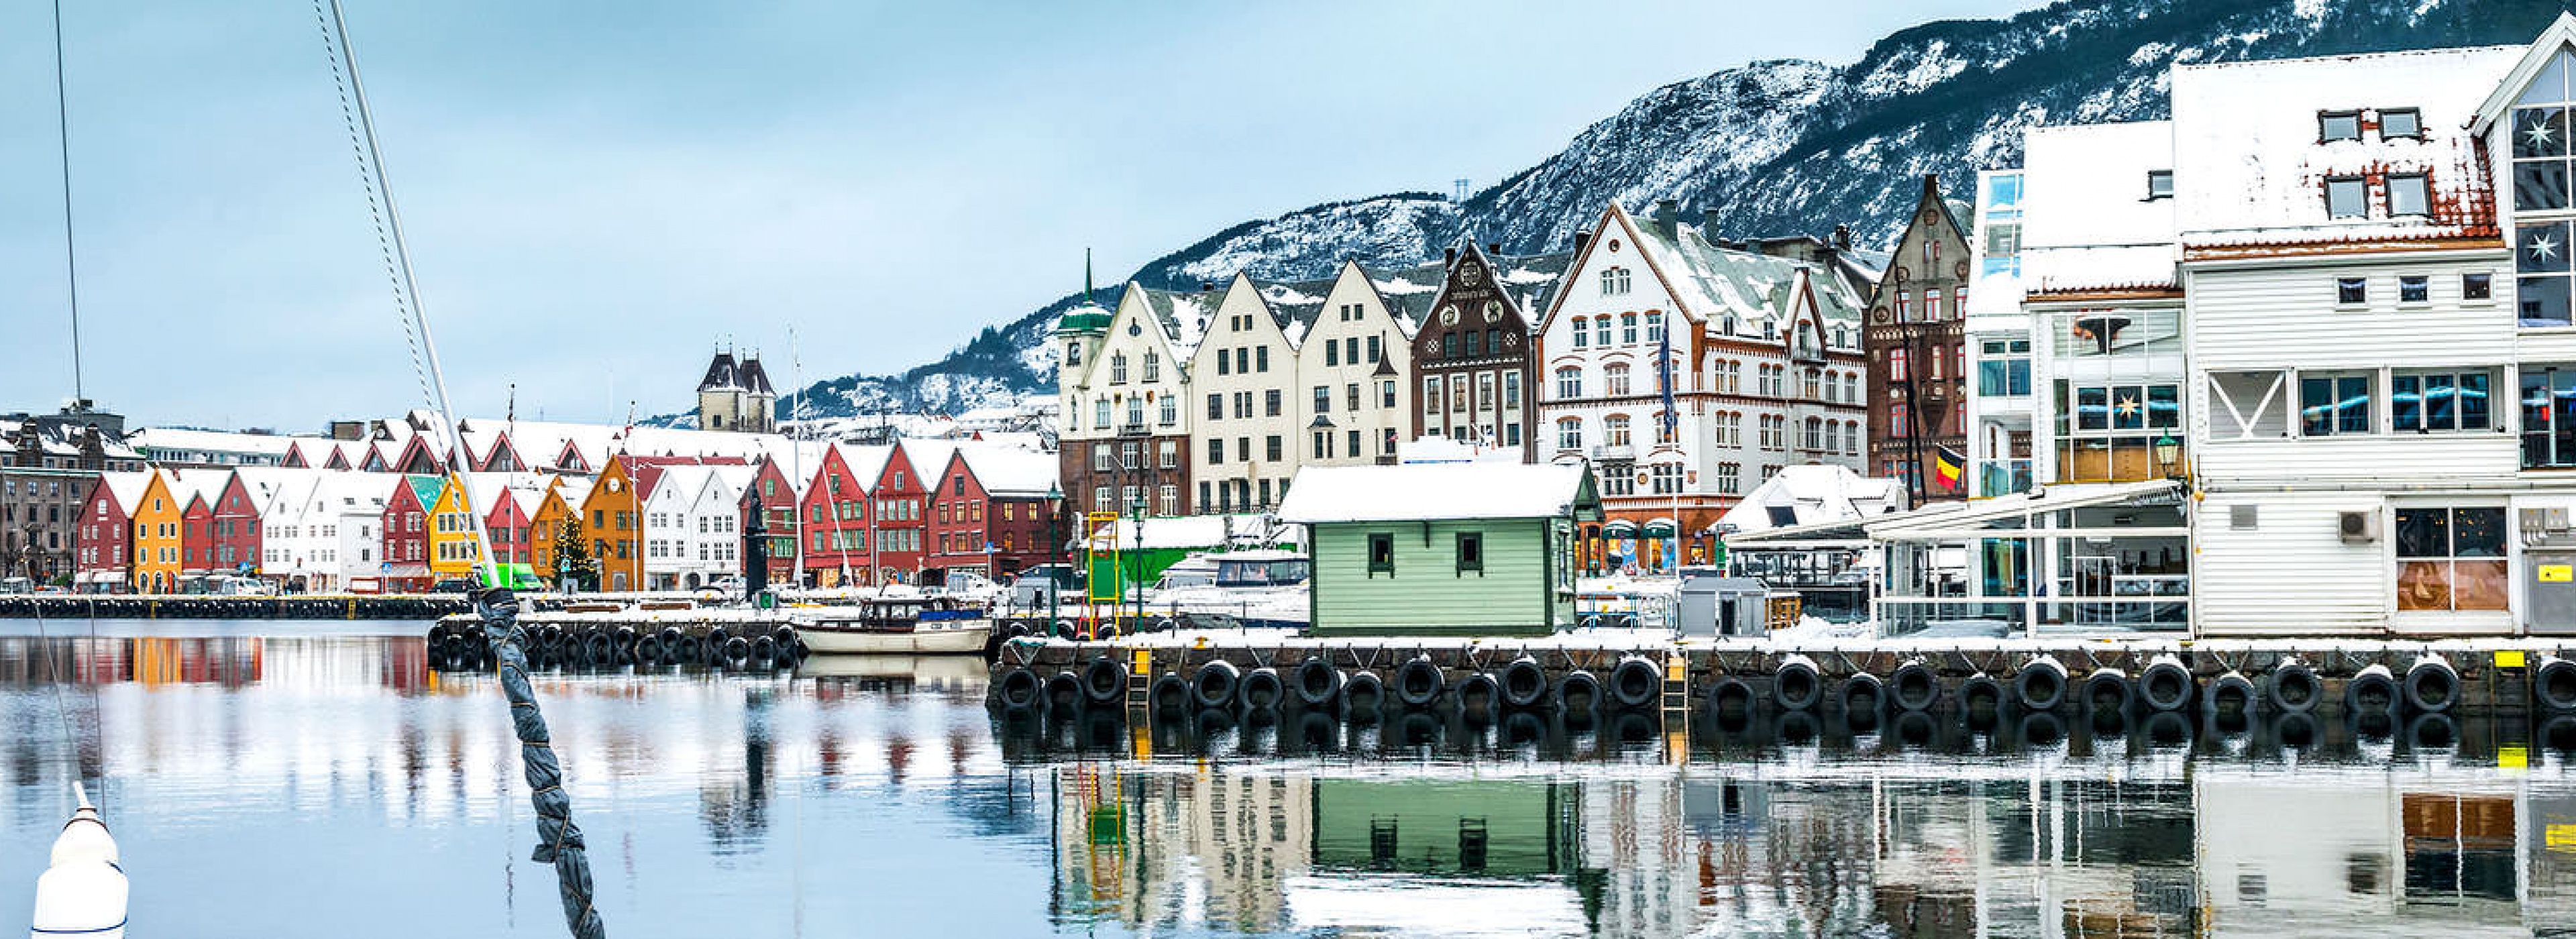 Visit Norway’s second largest city of Bergen that is a gateway to the magnificent land of fjords